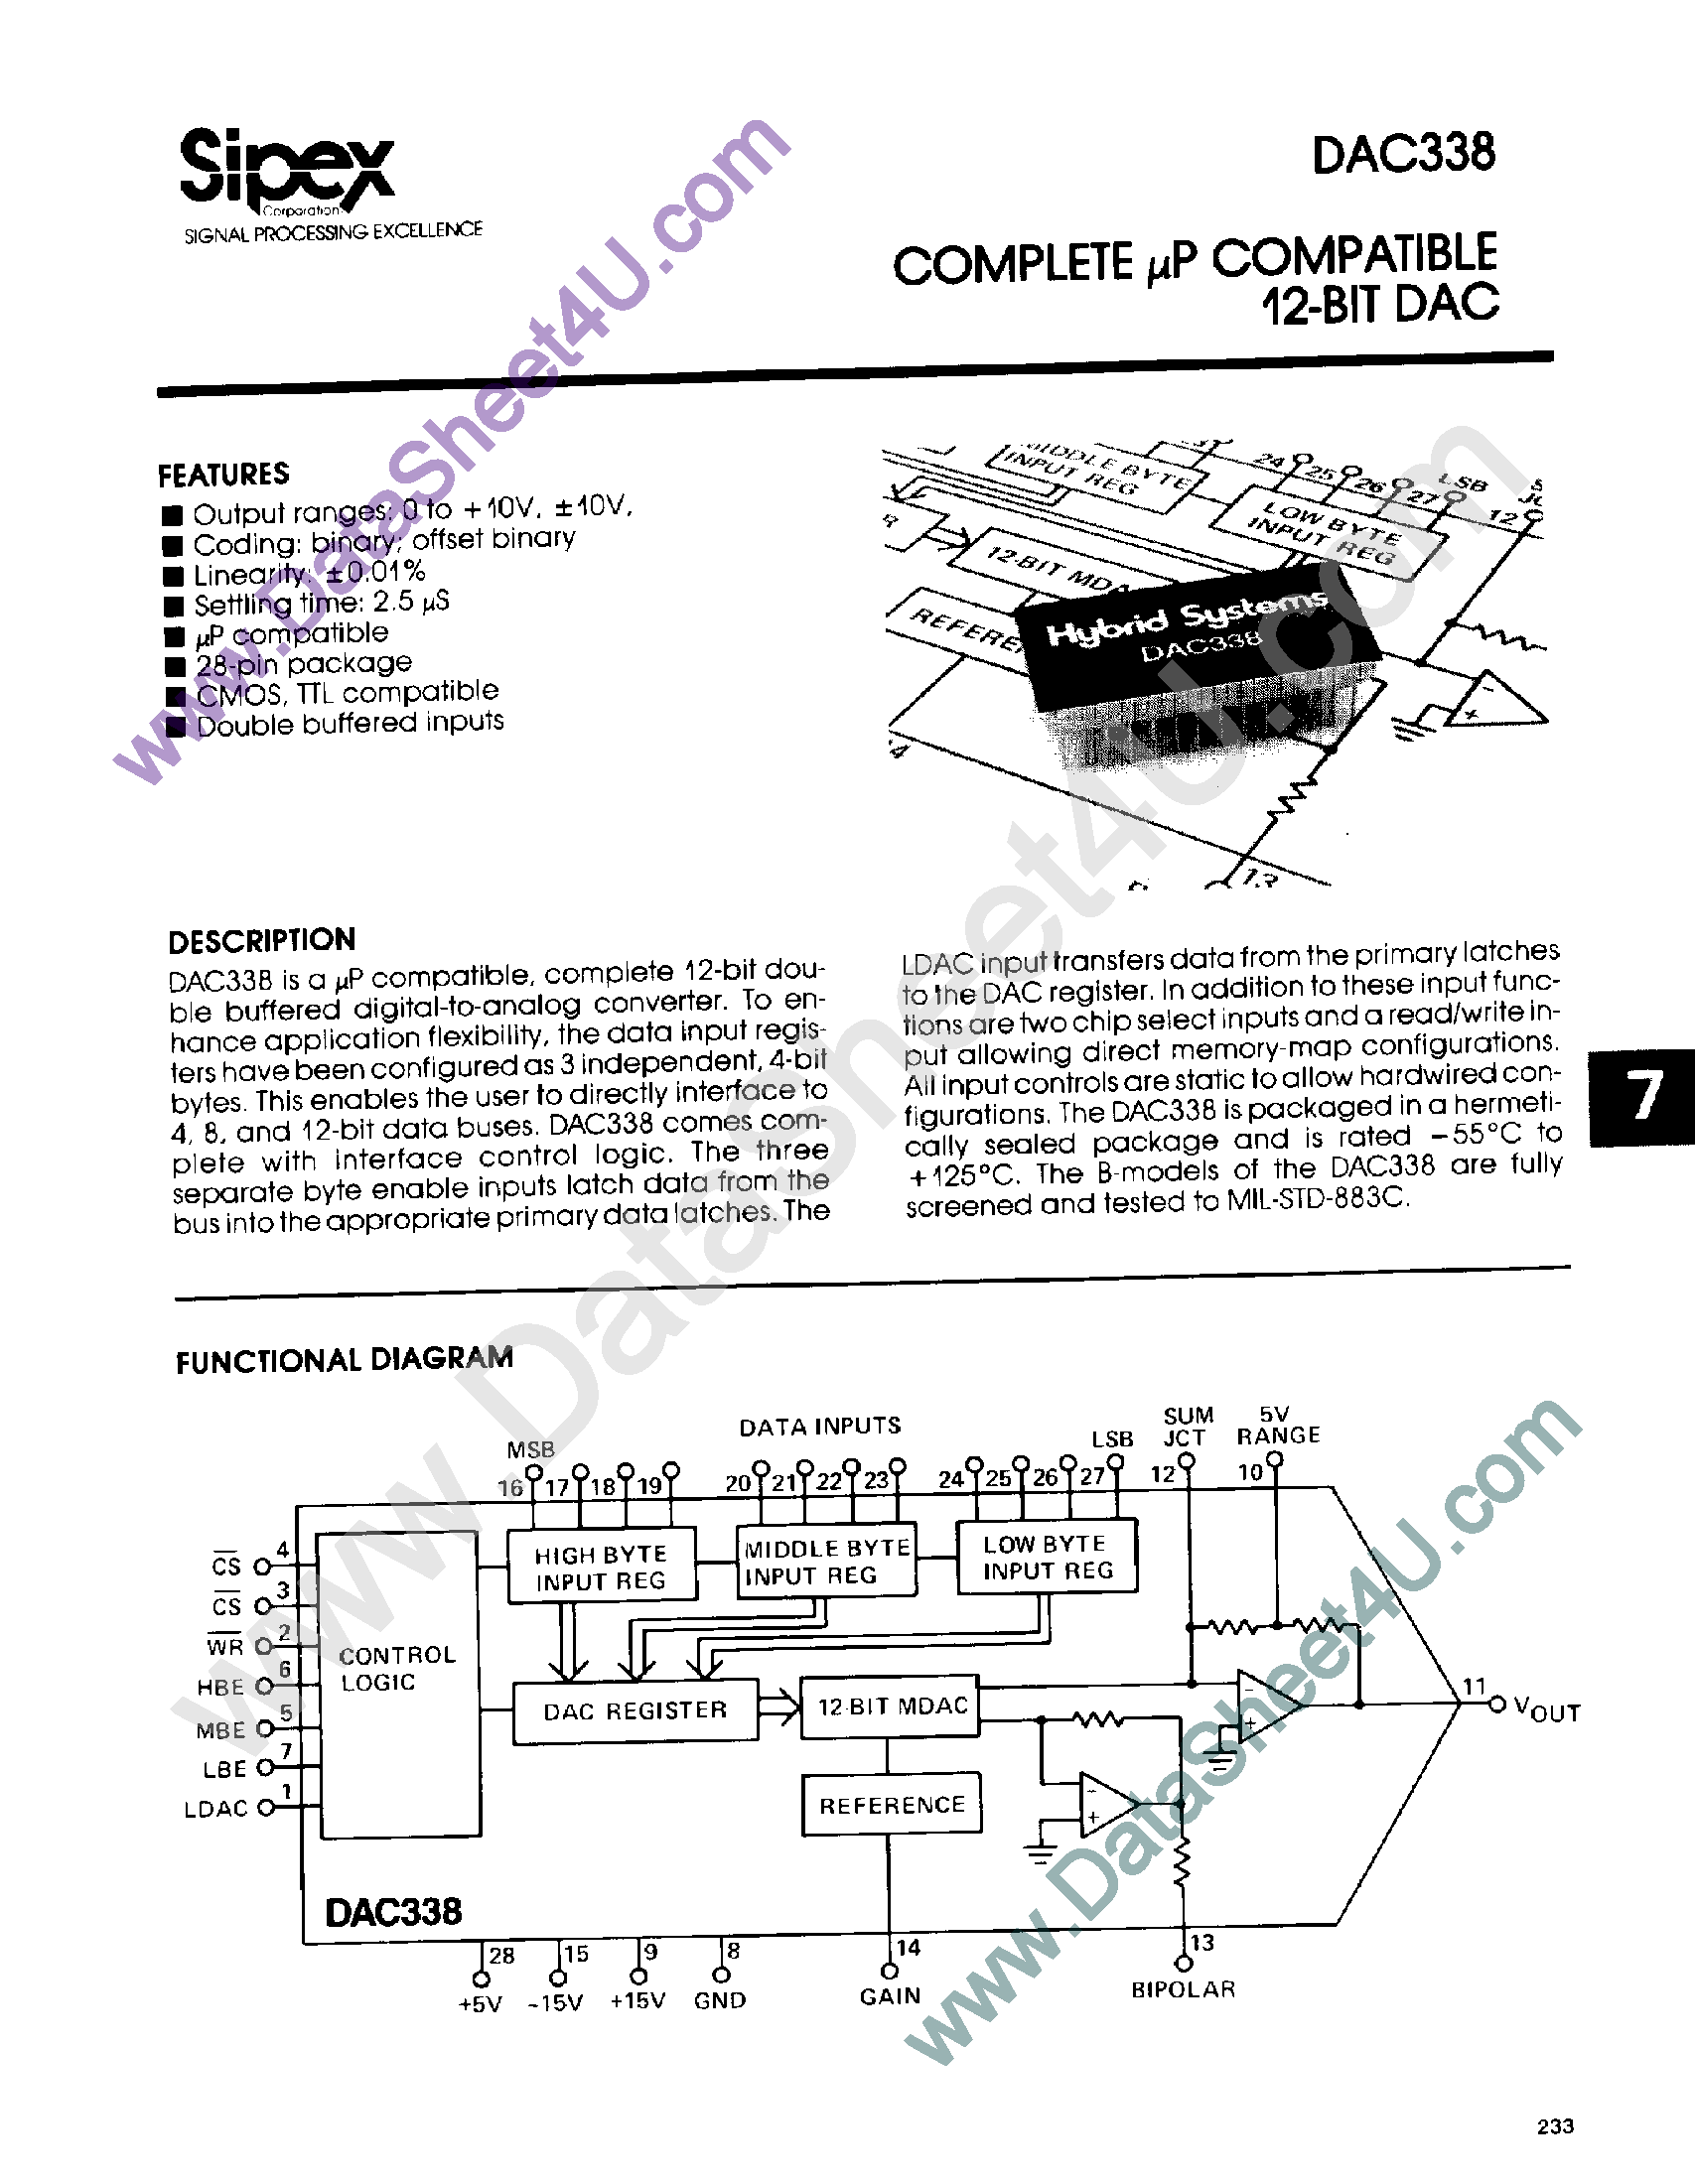 Datasheet DAC338 - Complete uP Compatible 12-Bit DAC page 1